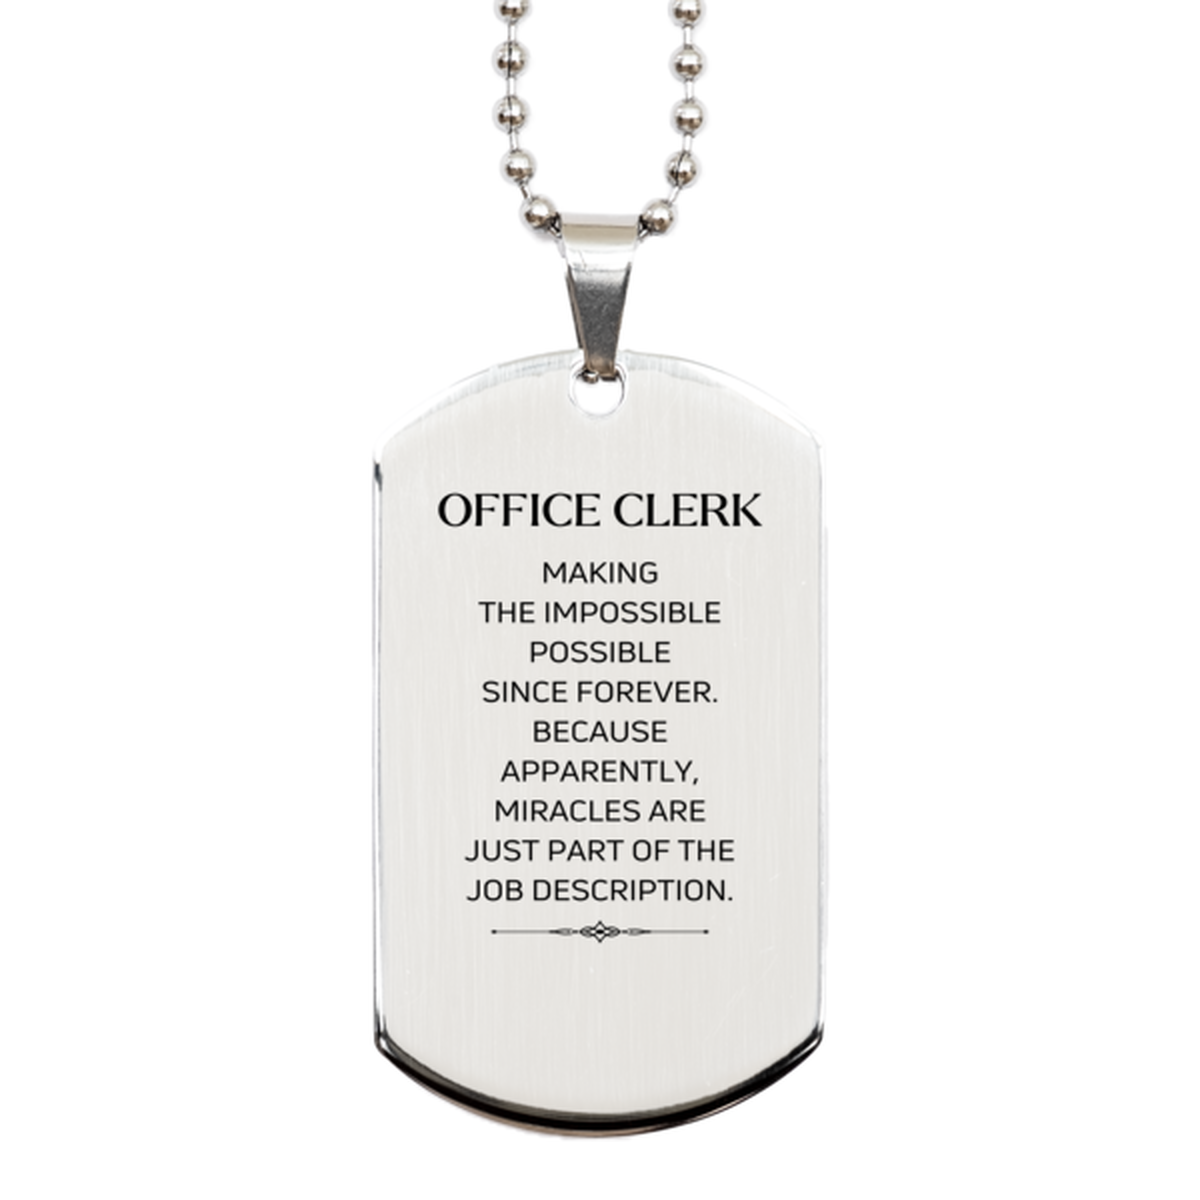 Funny Office Clerk Gifts, Miracles are just part of the job description, Inspirational Birthday Silver Dog Tag For Office Clerk, Men, Women, Coworkers, Friends, Boss